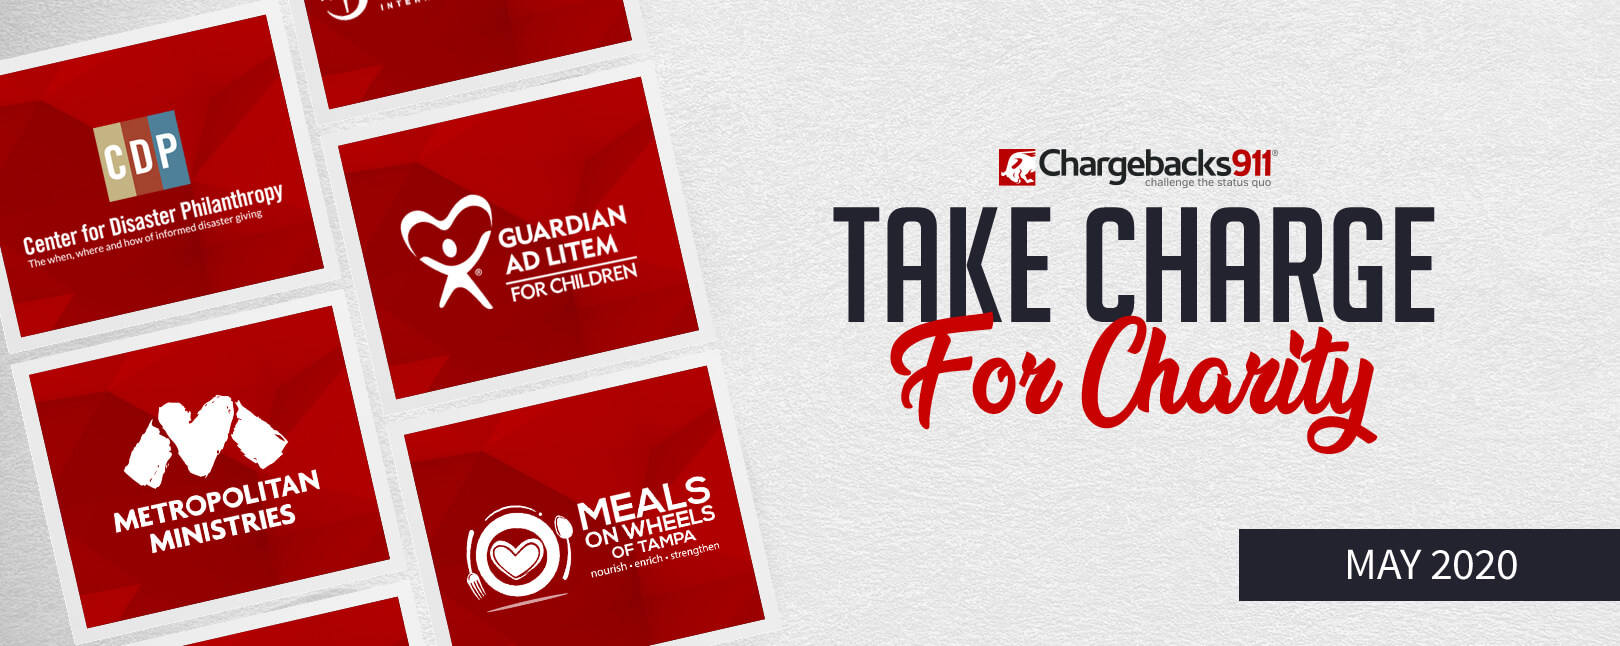 Take Charge for Charity